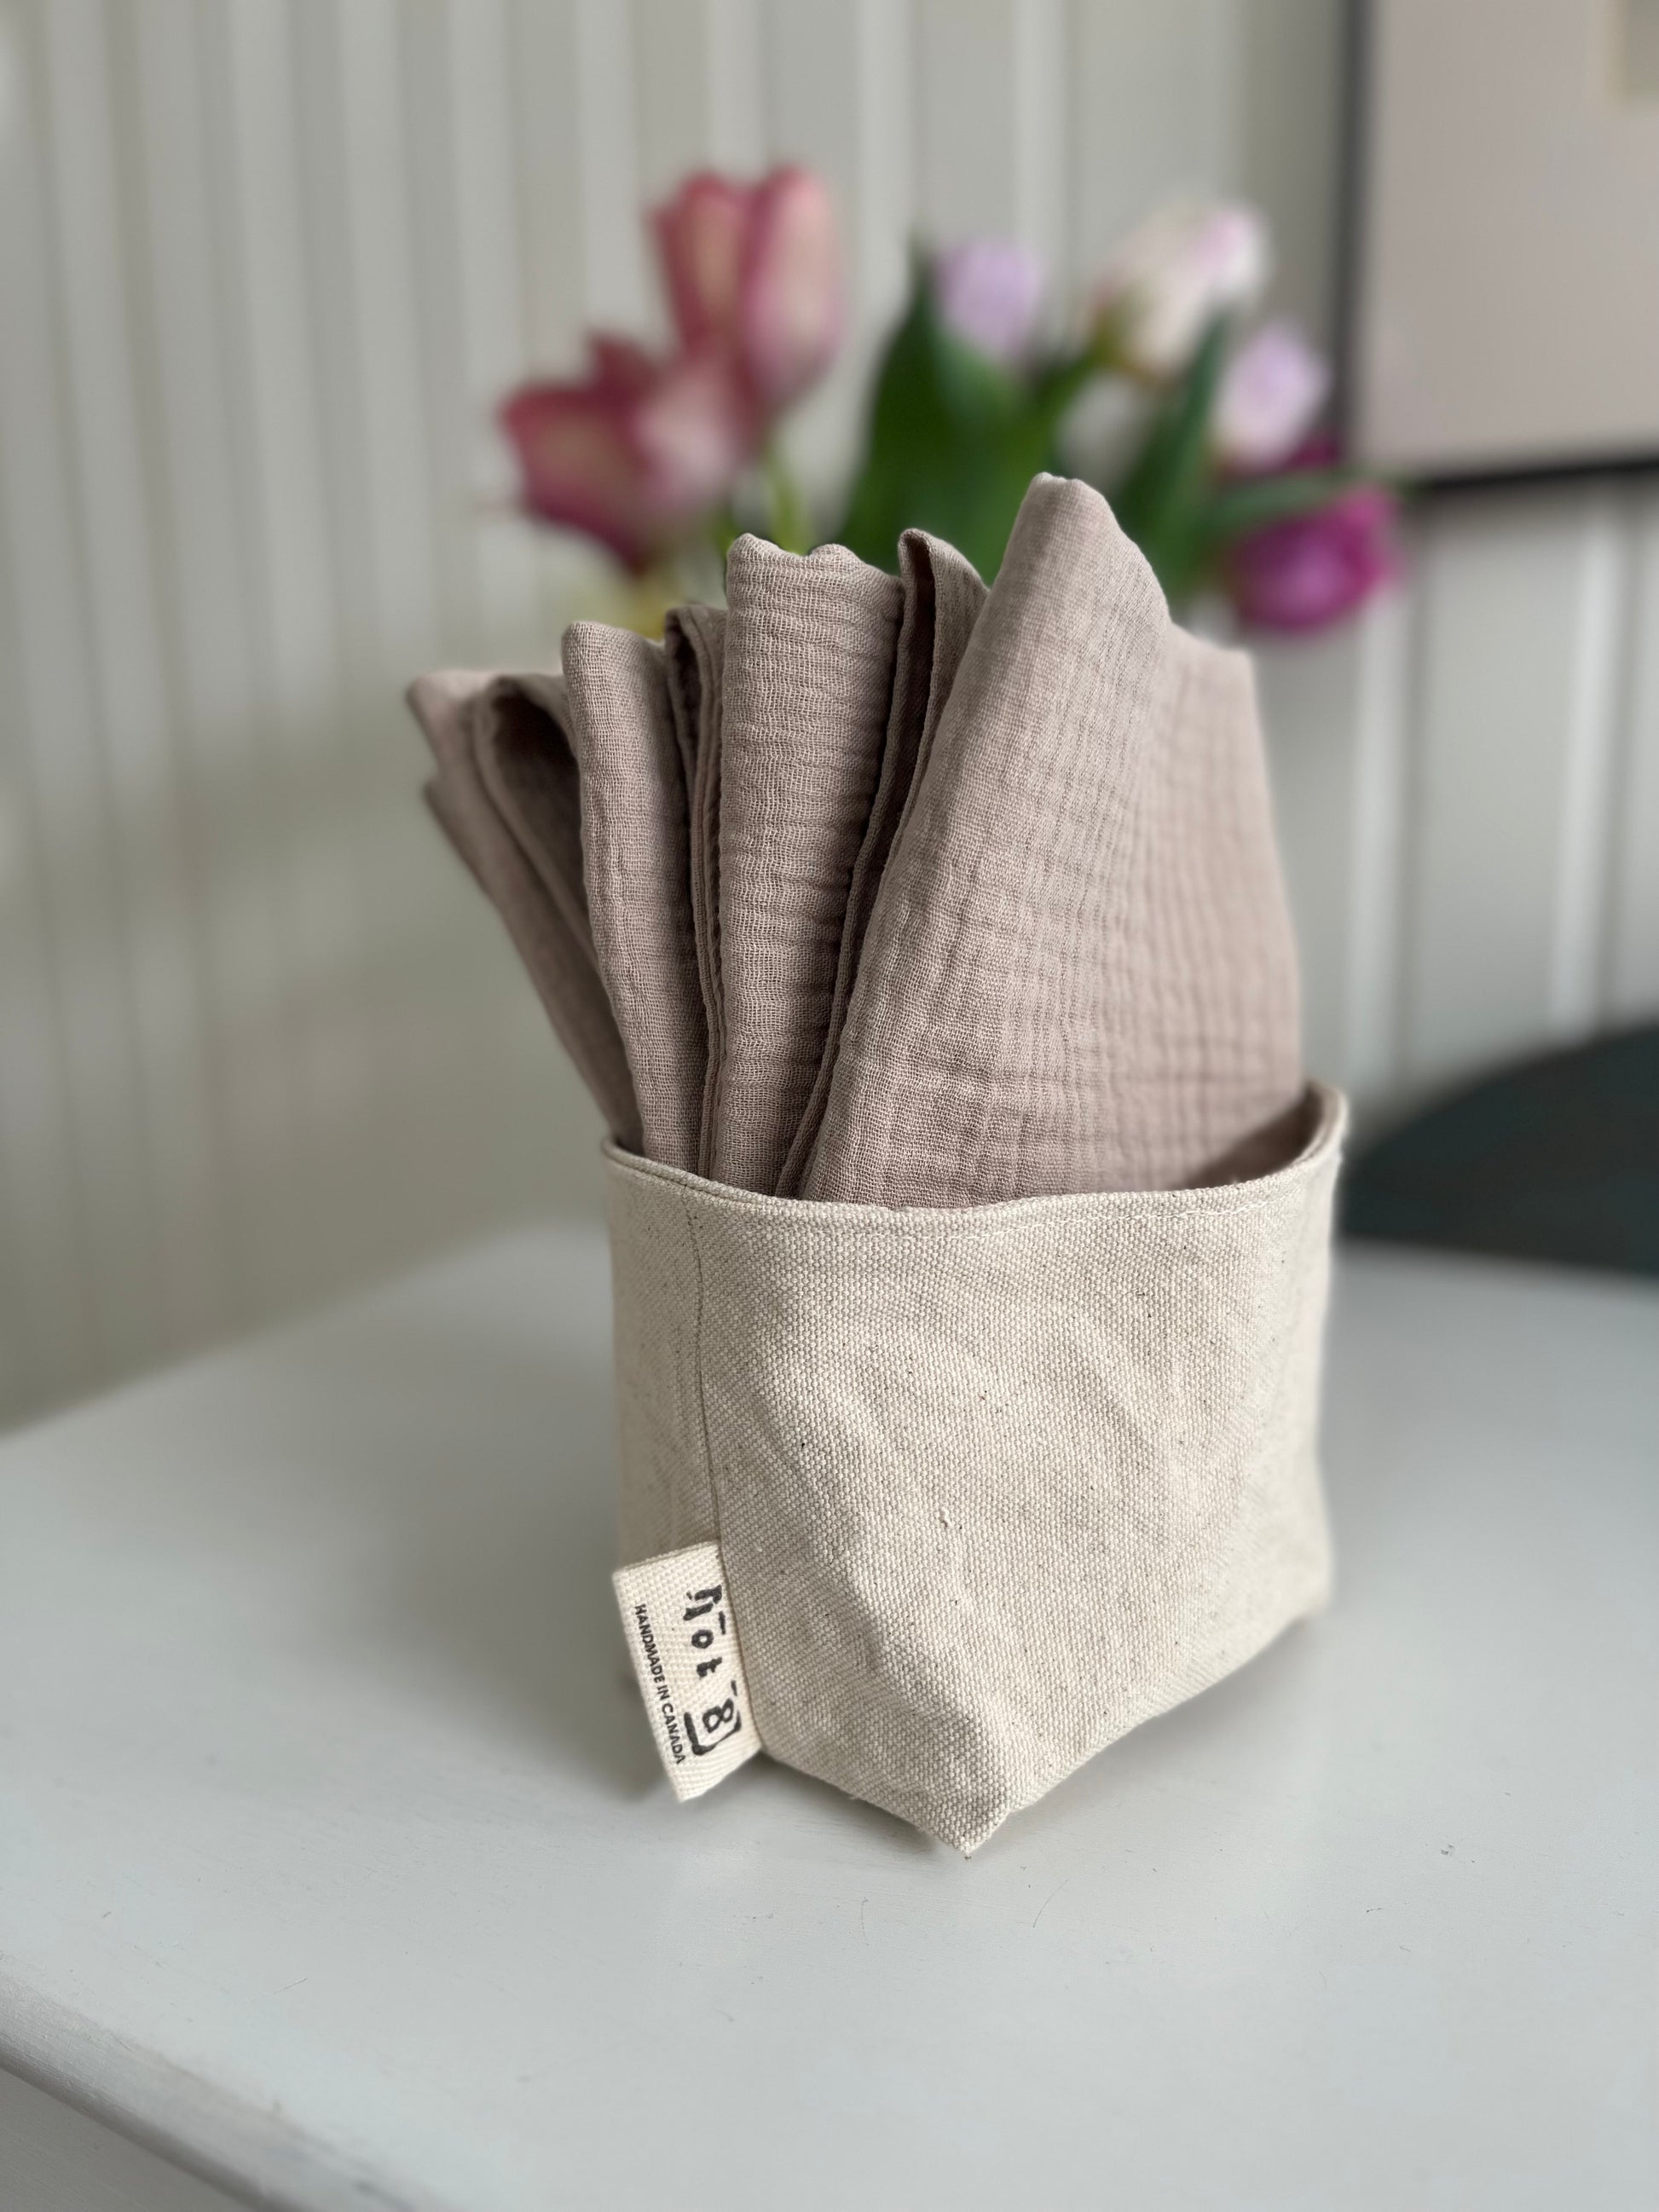 4 organic cotton facial cleansing cloths in 'faun' are nestled in a fabric organizer called The Bucket. A vase of pink tulips is blurred in the background.